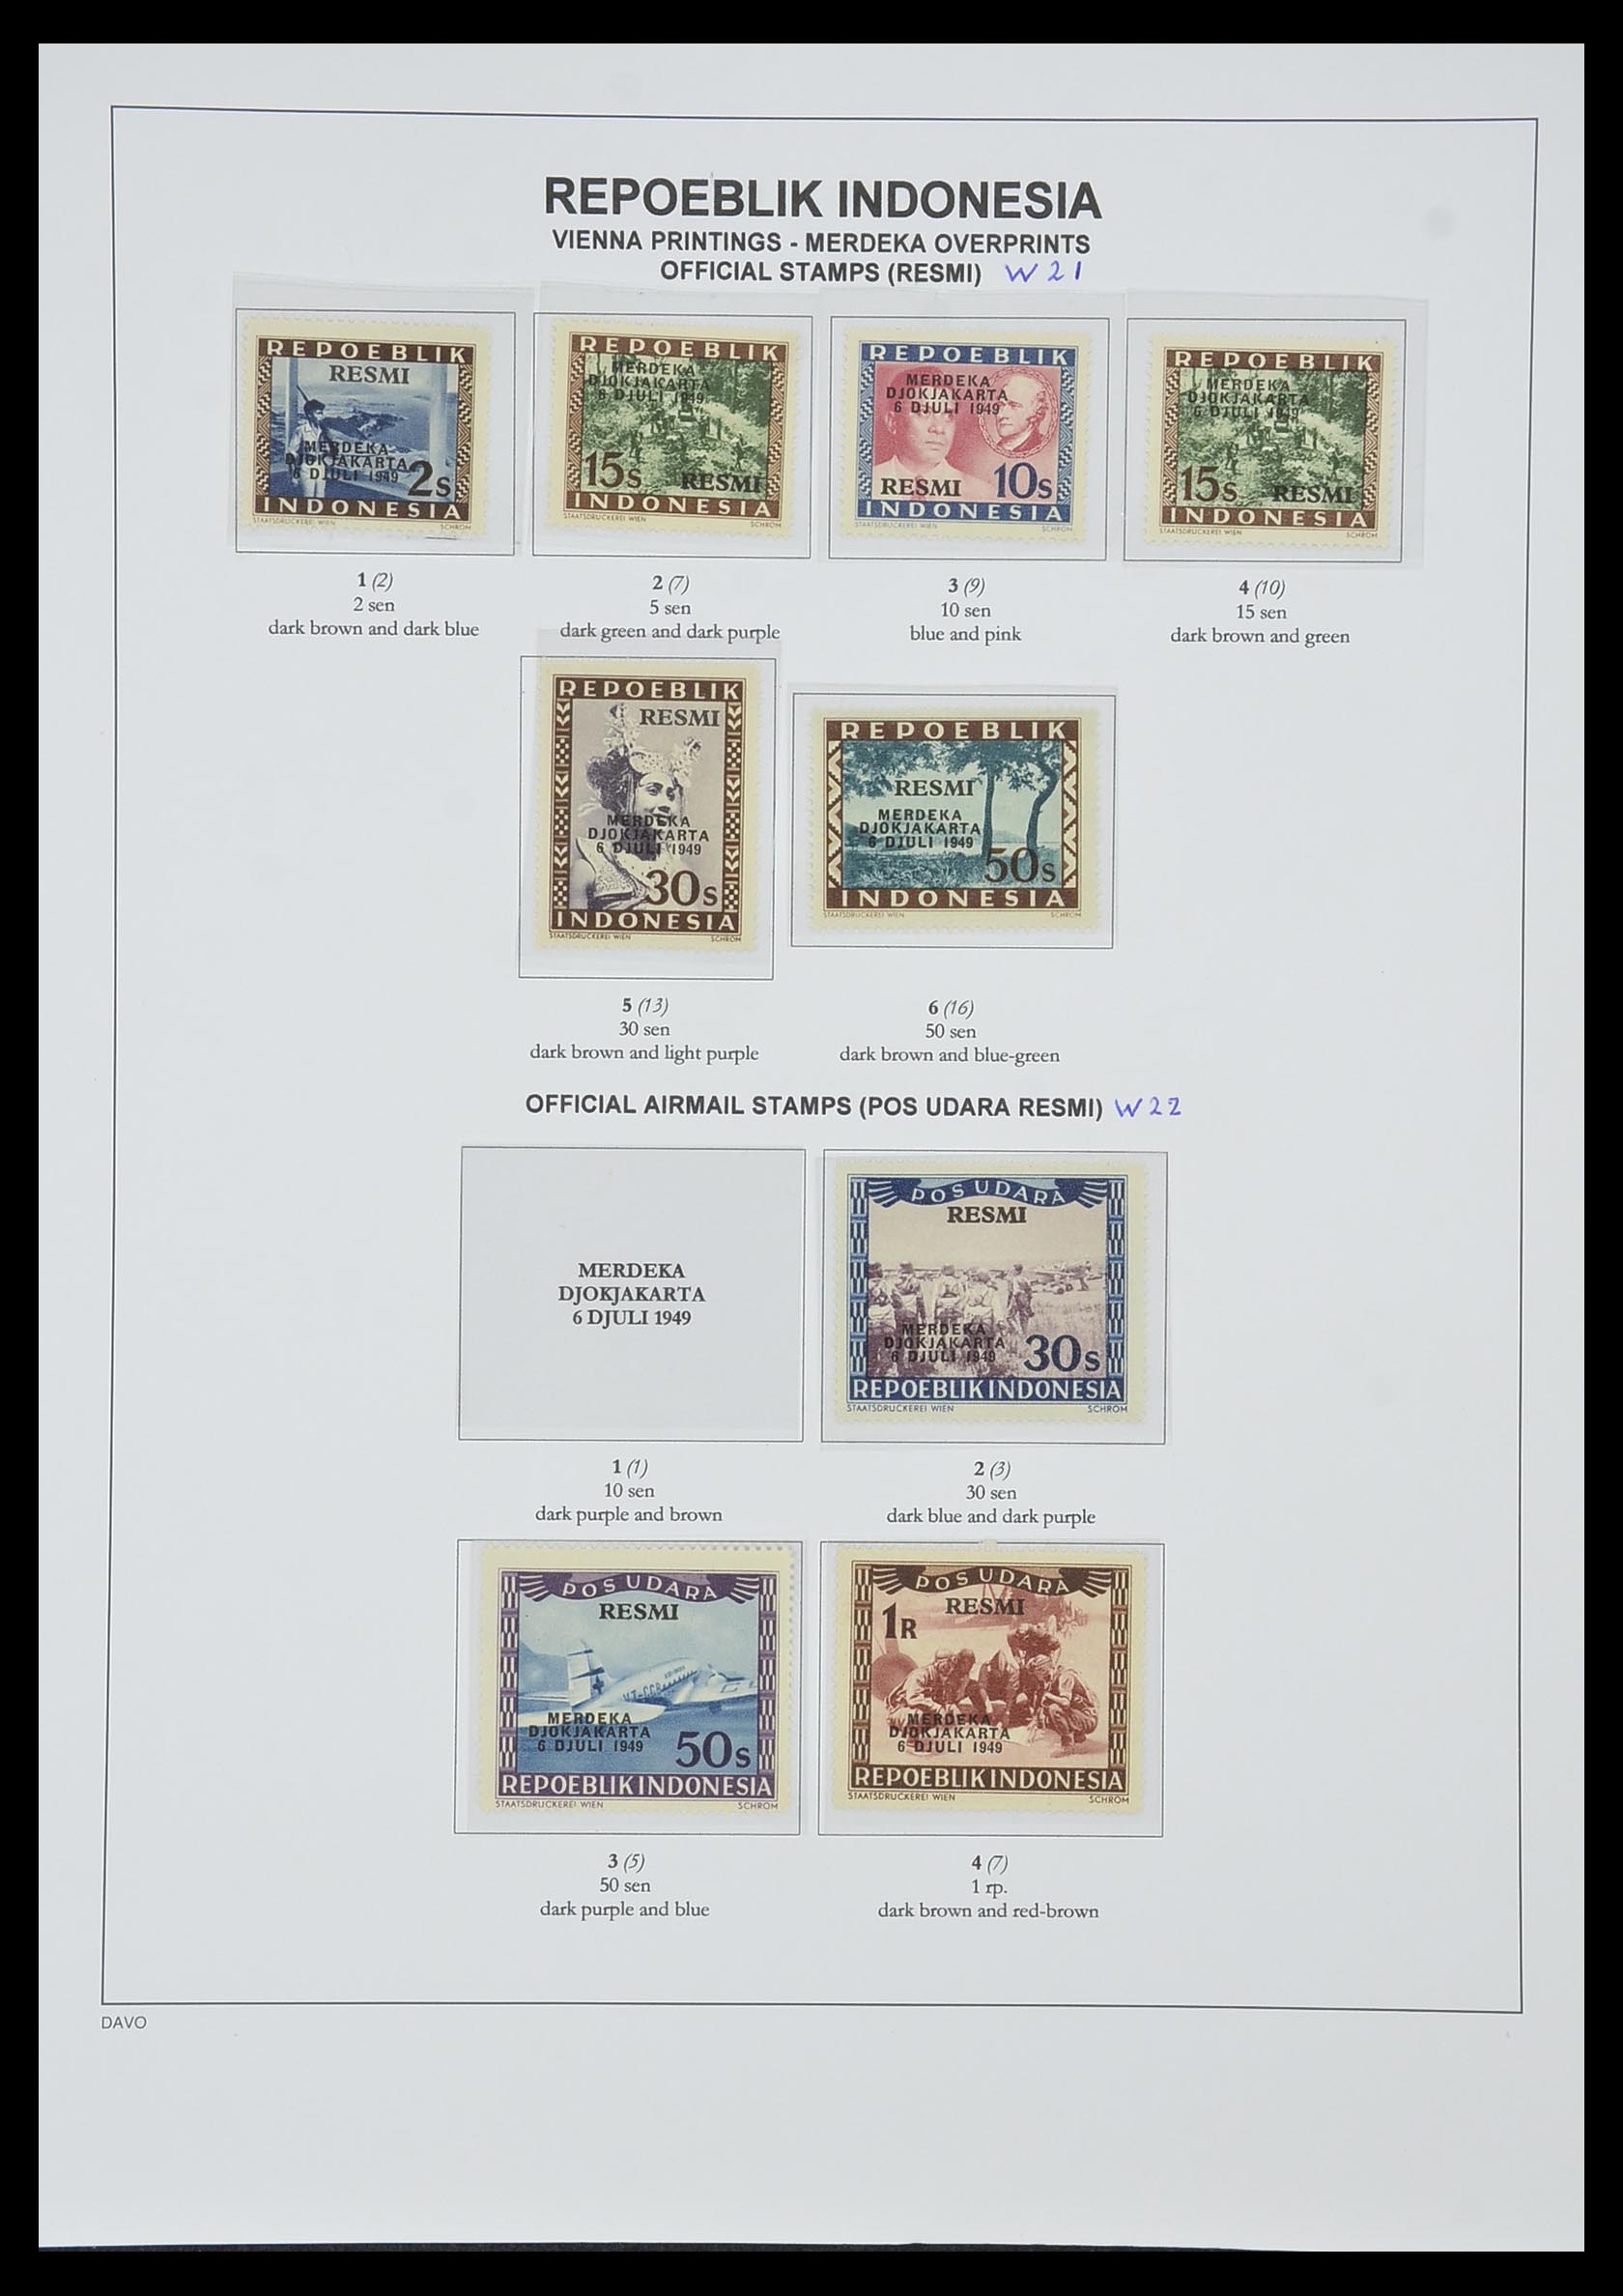 33988 036 - Stamp collection 33988 Vienna printings Indonesia.